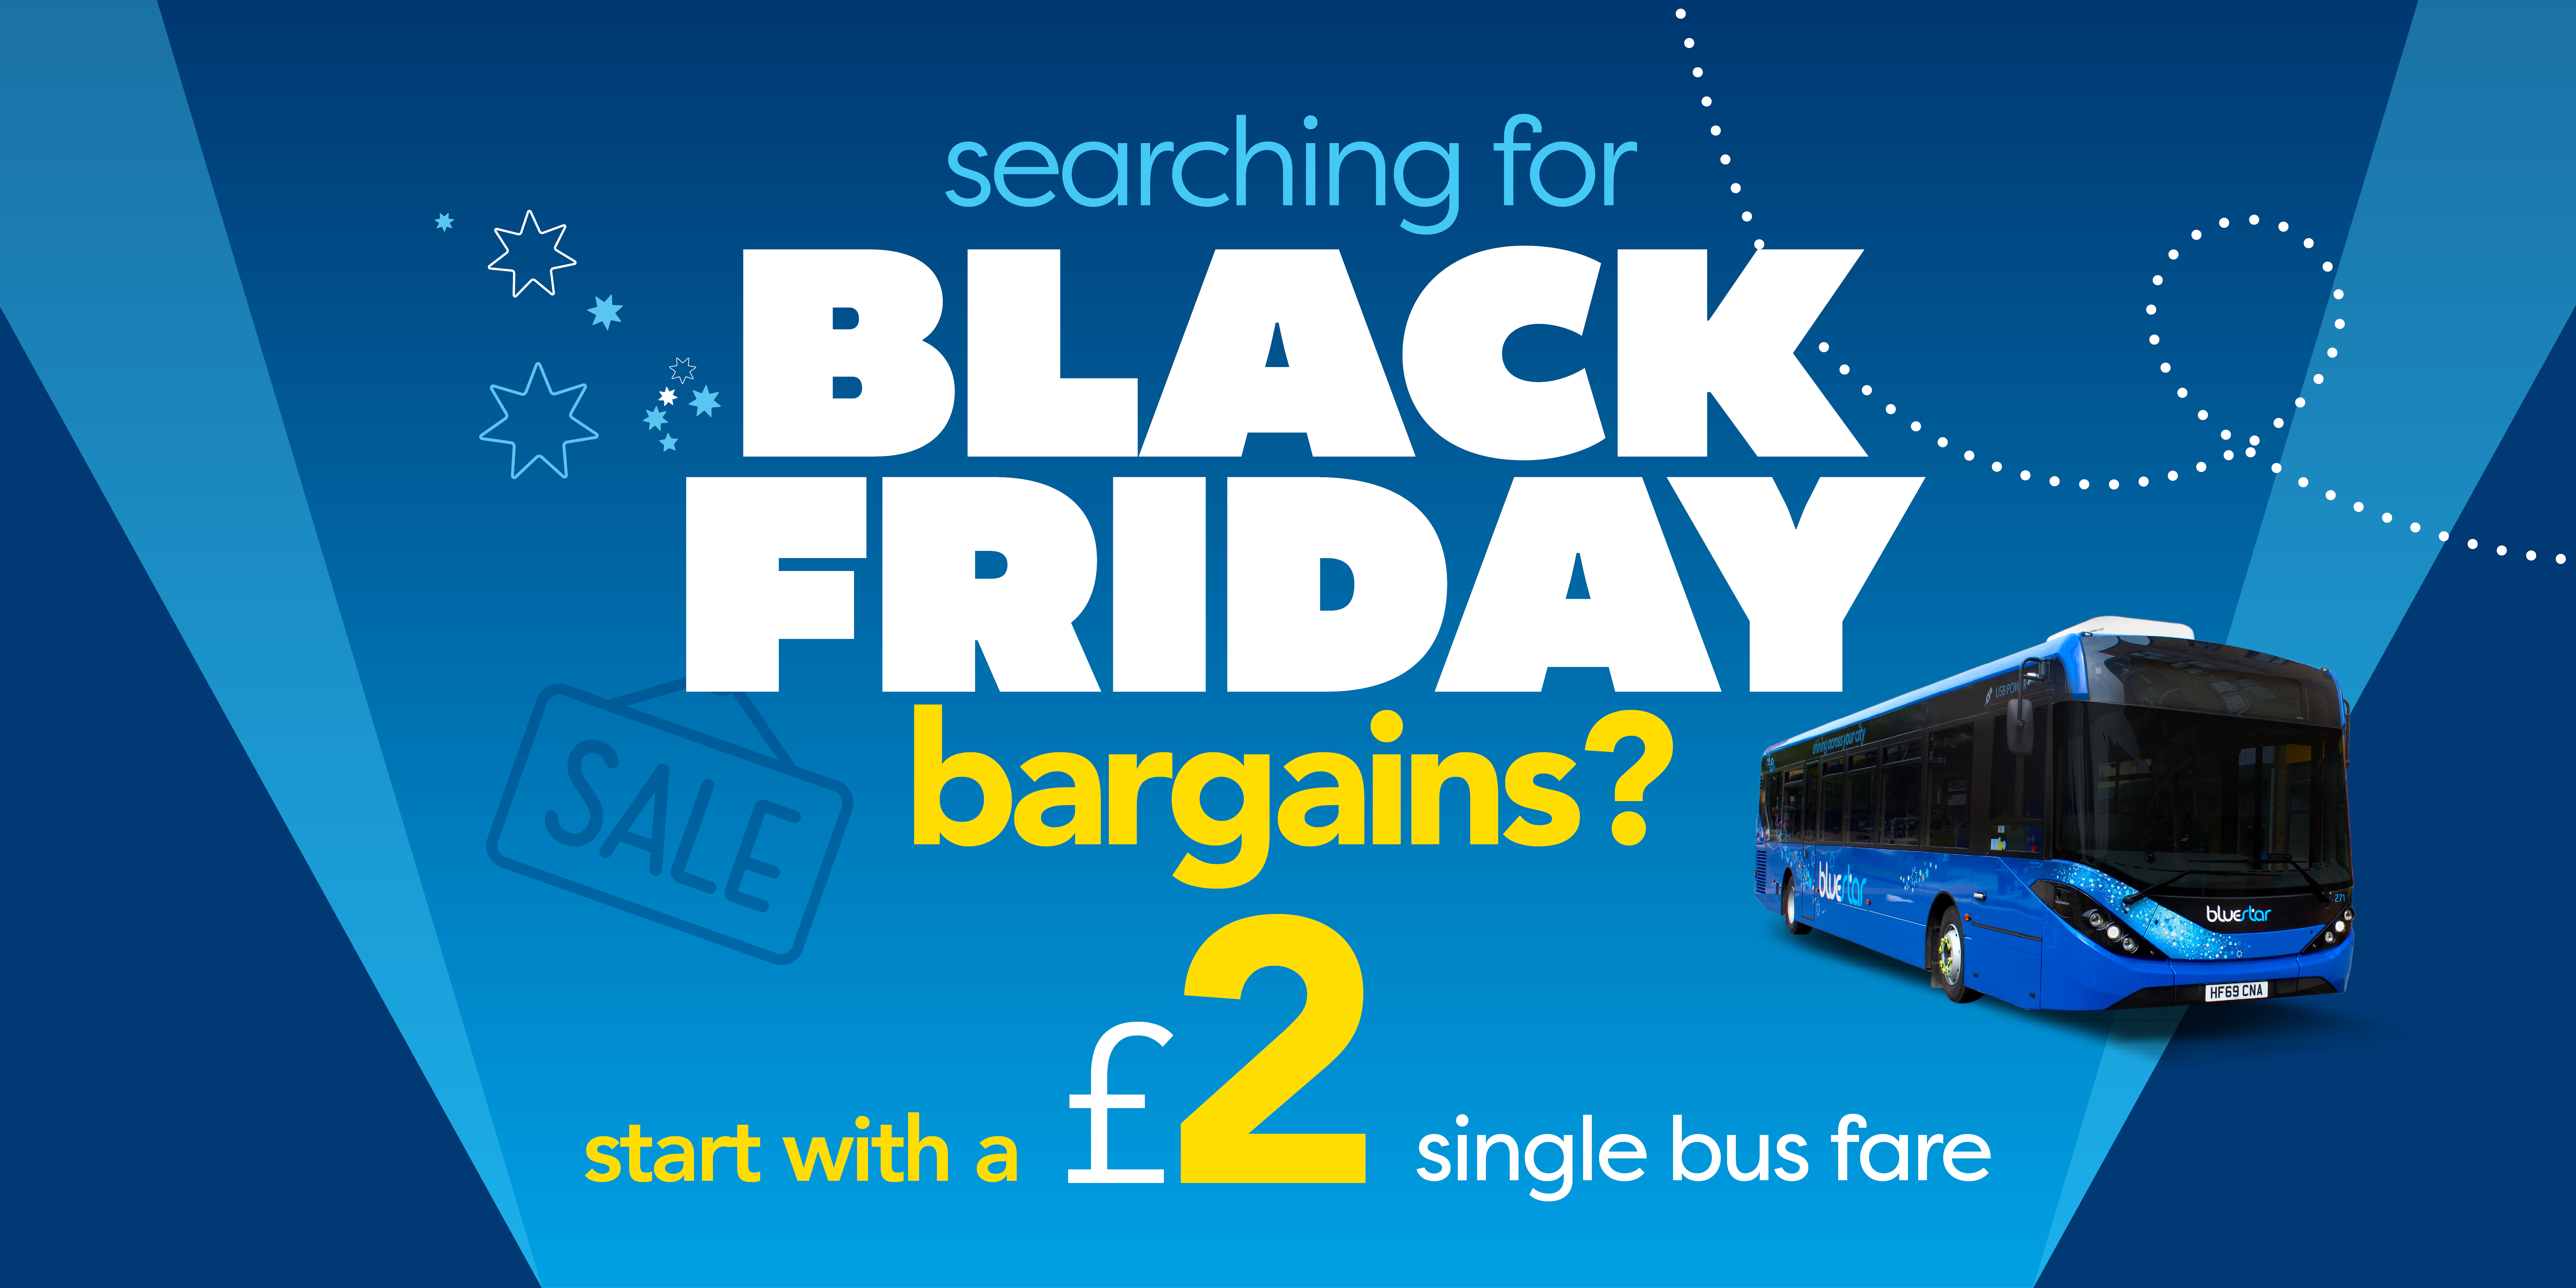 travel for £2 this Black Friday image with a Bluestar bus